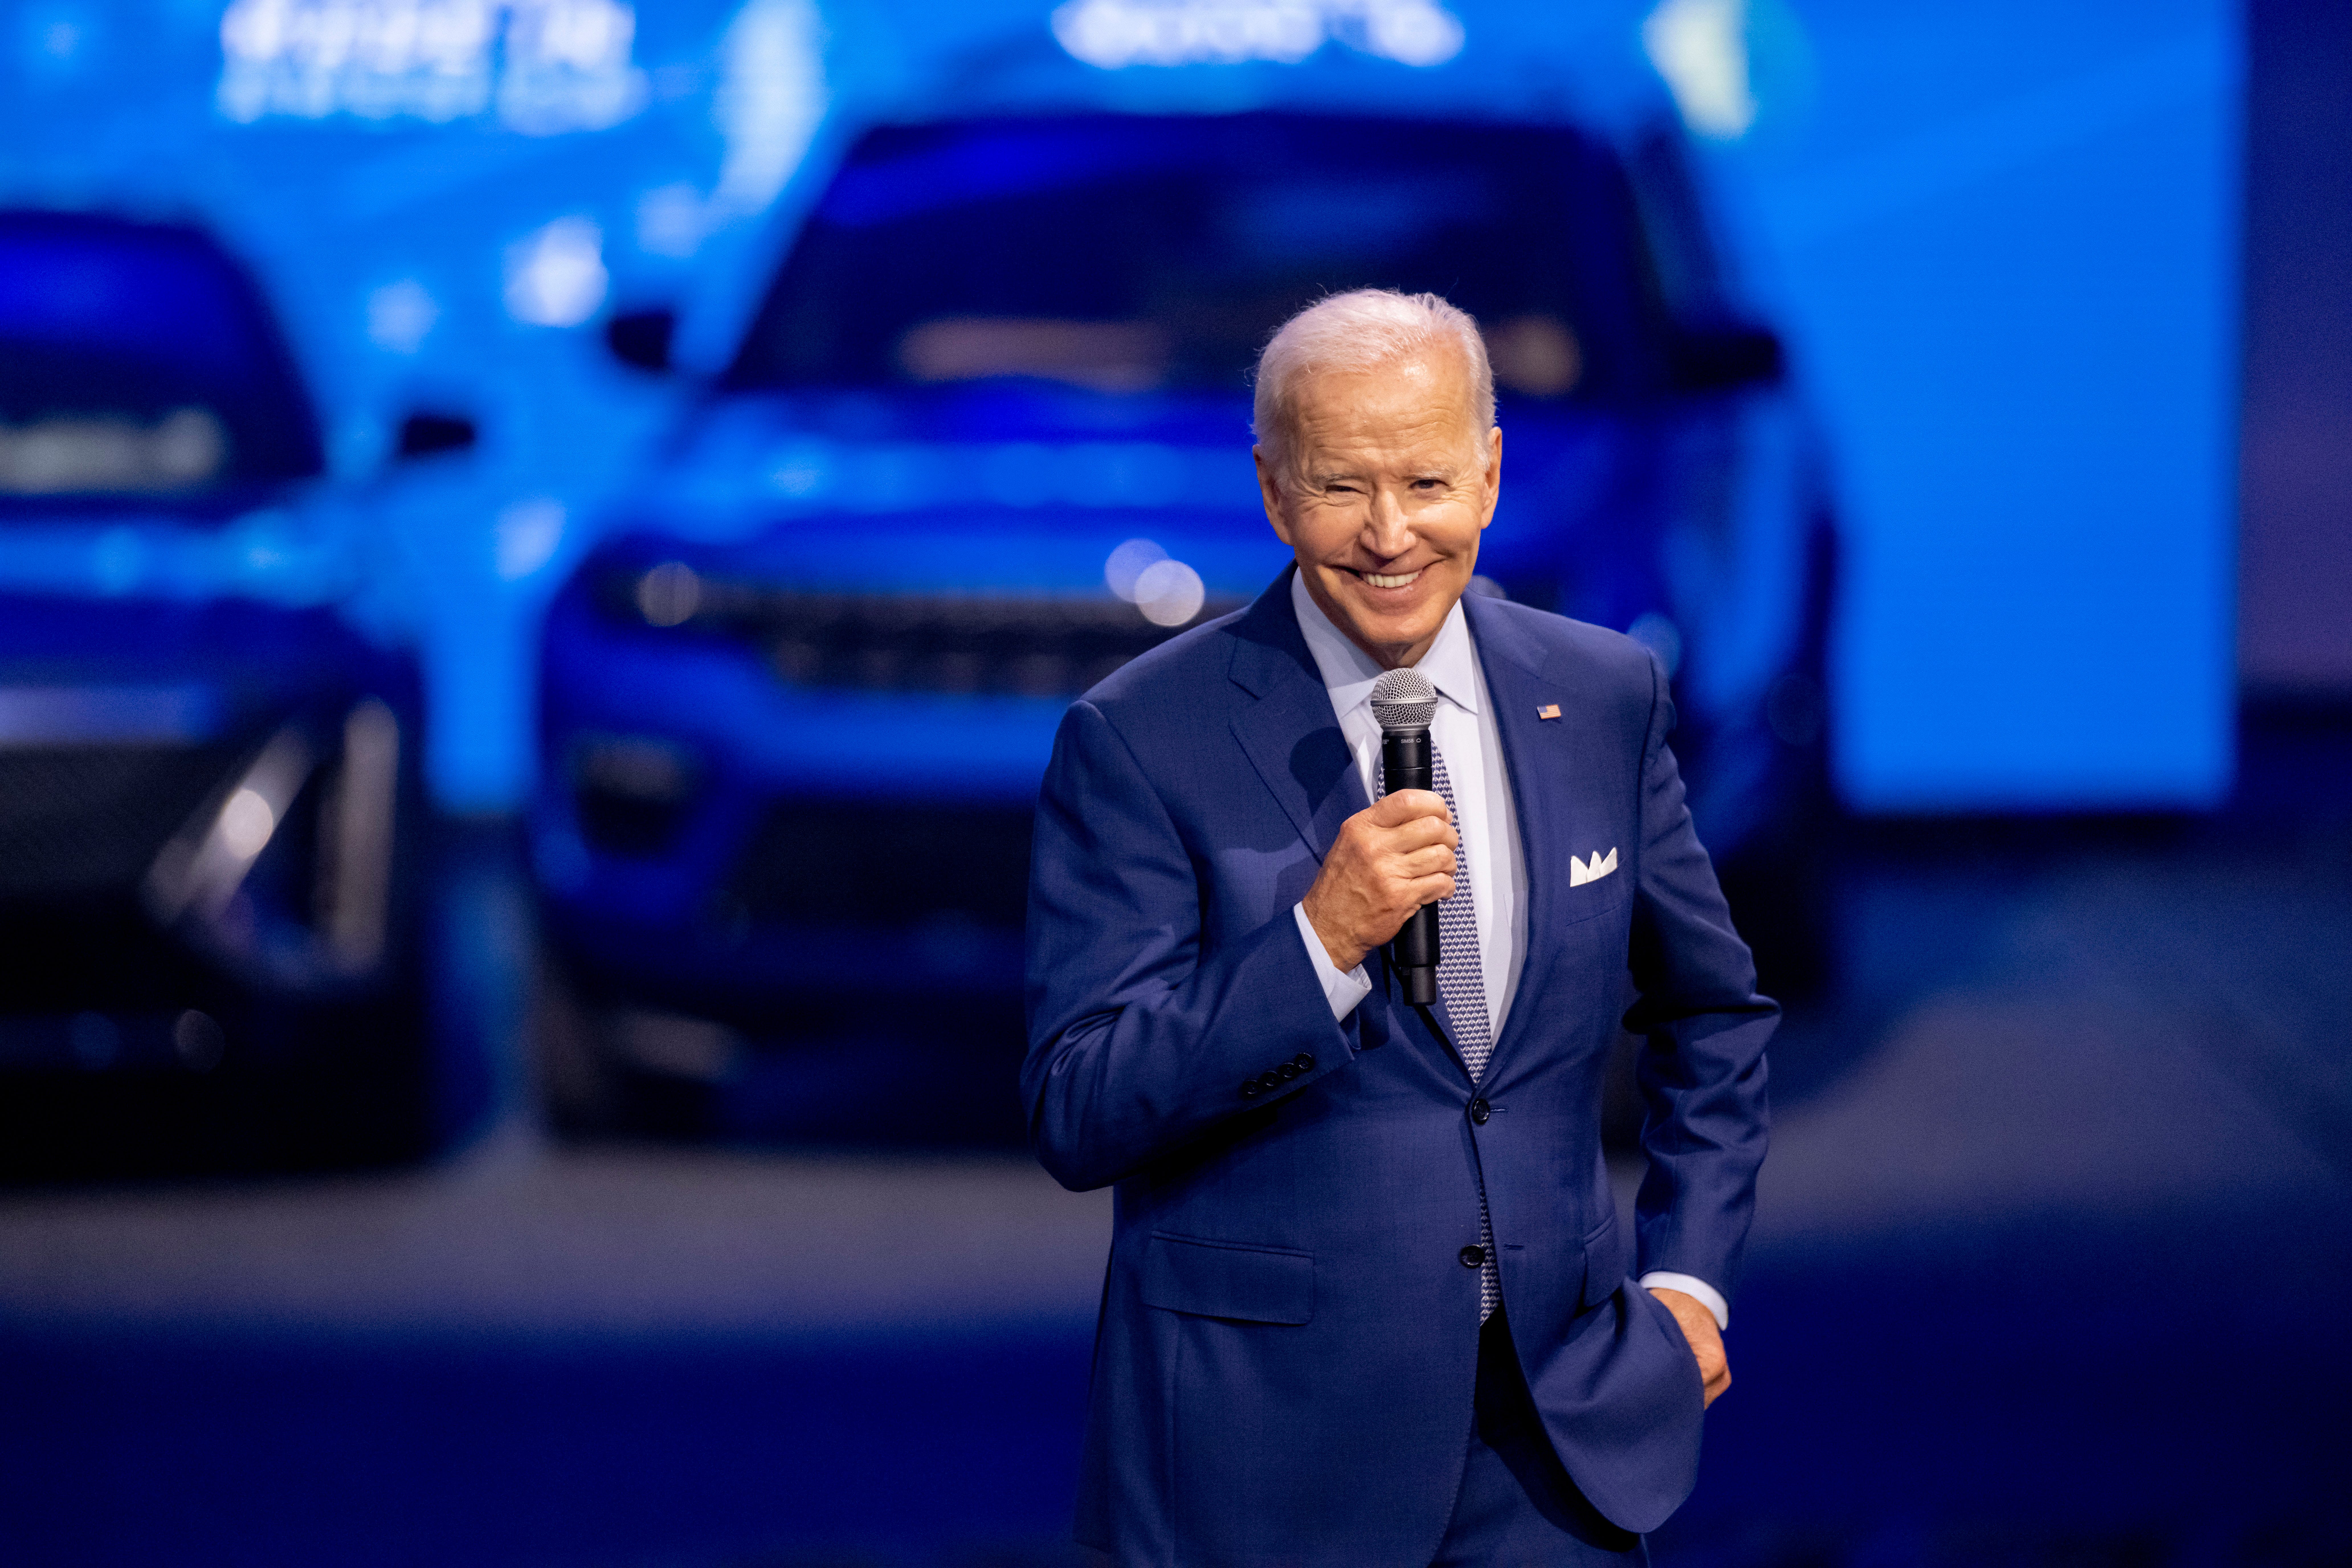 President Joe Biden gives a speech while visiting the North American International Auto Show at Huntington Place, in Detroit, September 14, 2022.